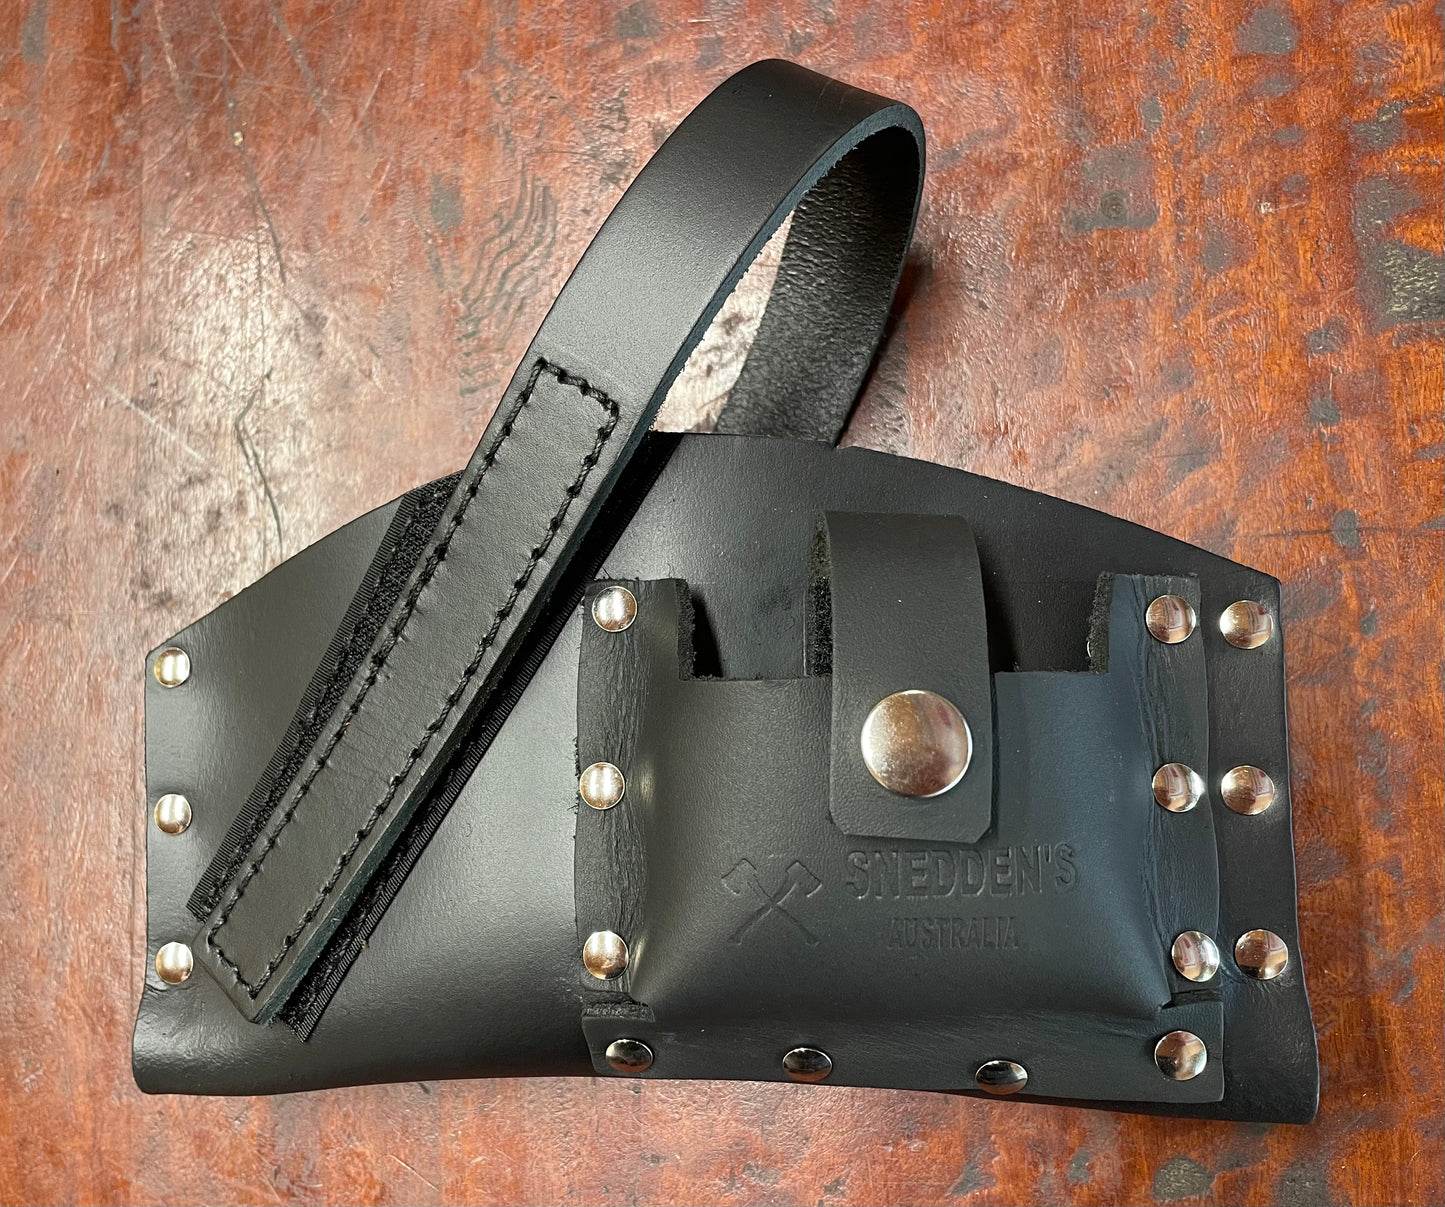 Knockabout / Race Axe Cover with sharpening stone pouch - Black Leather